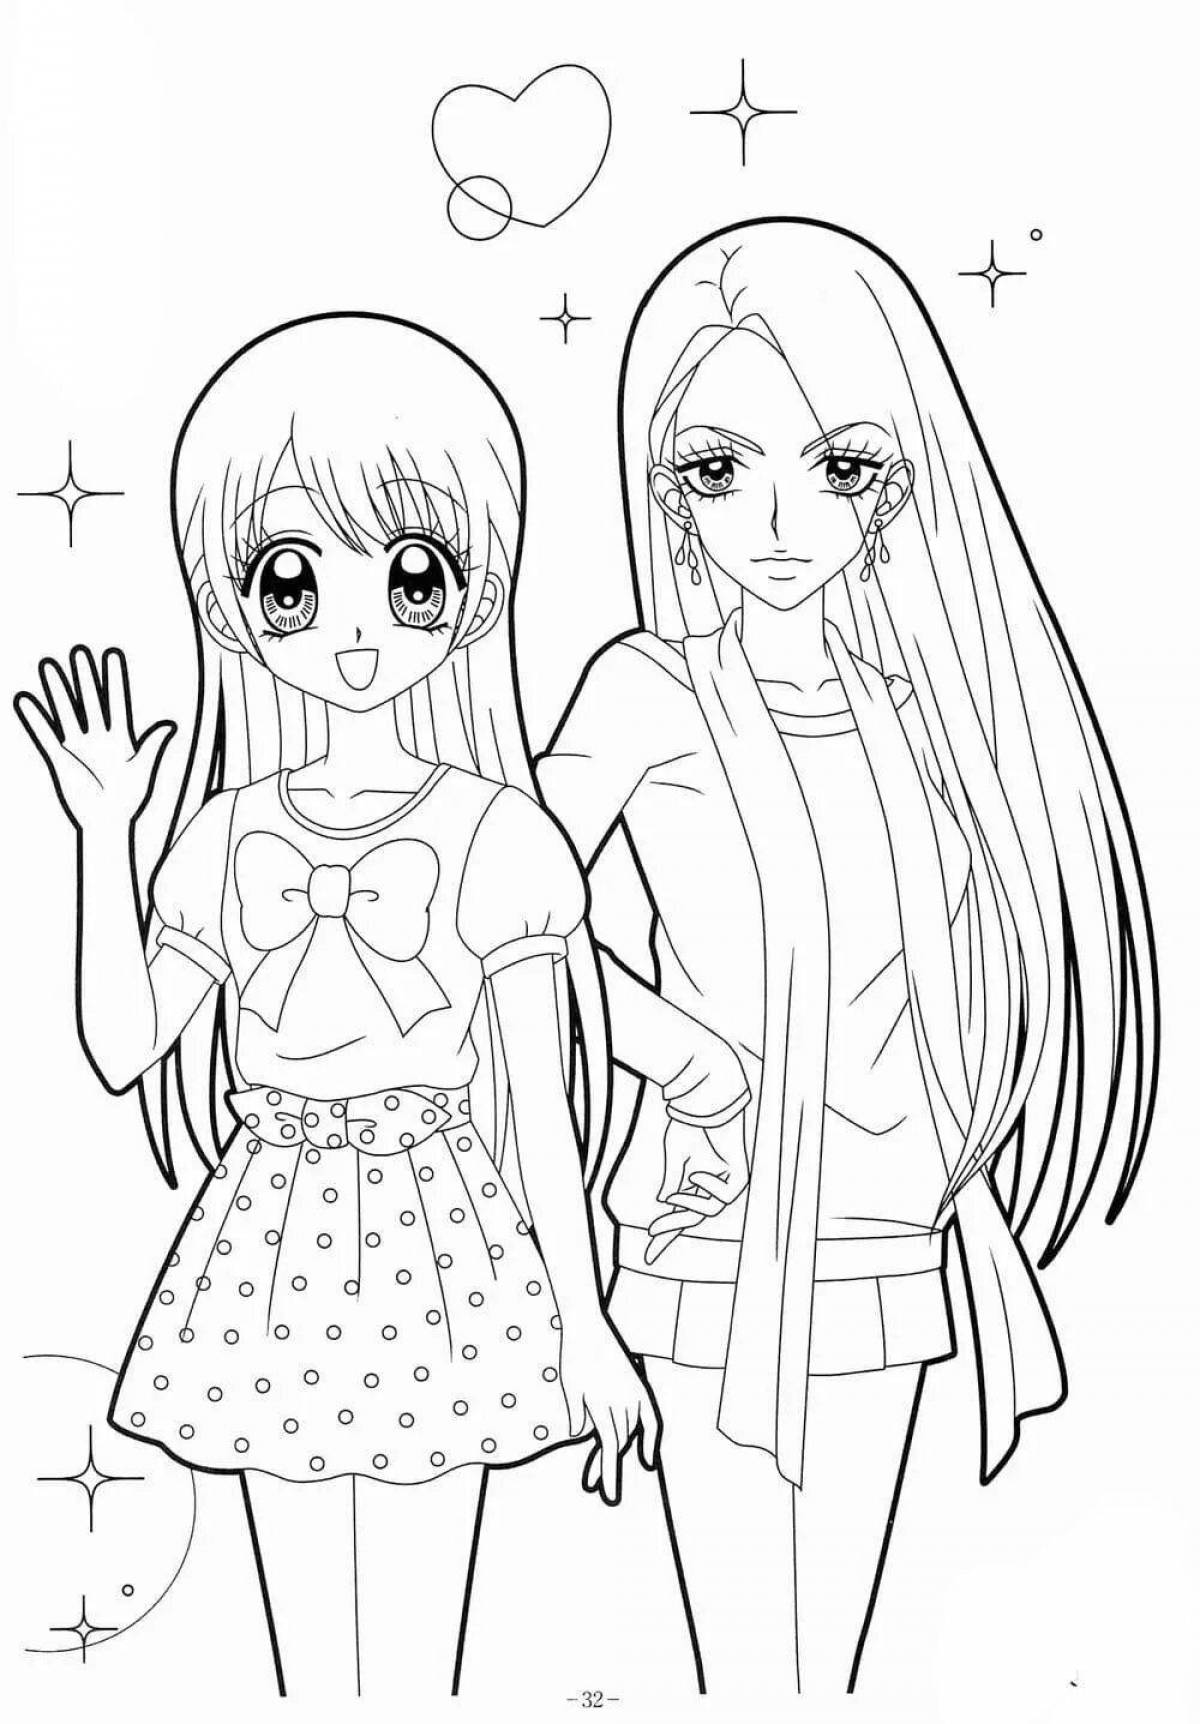 Happy coloring page girls girlfriends